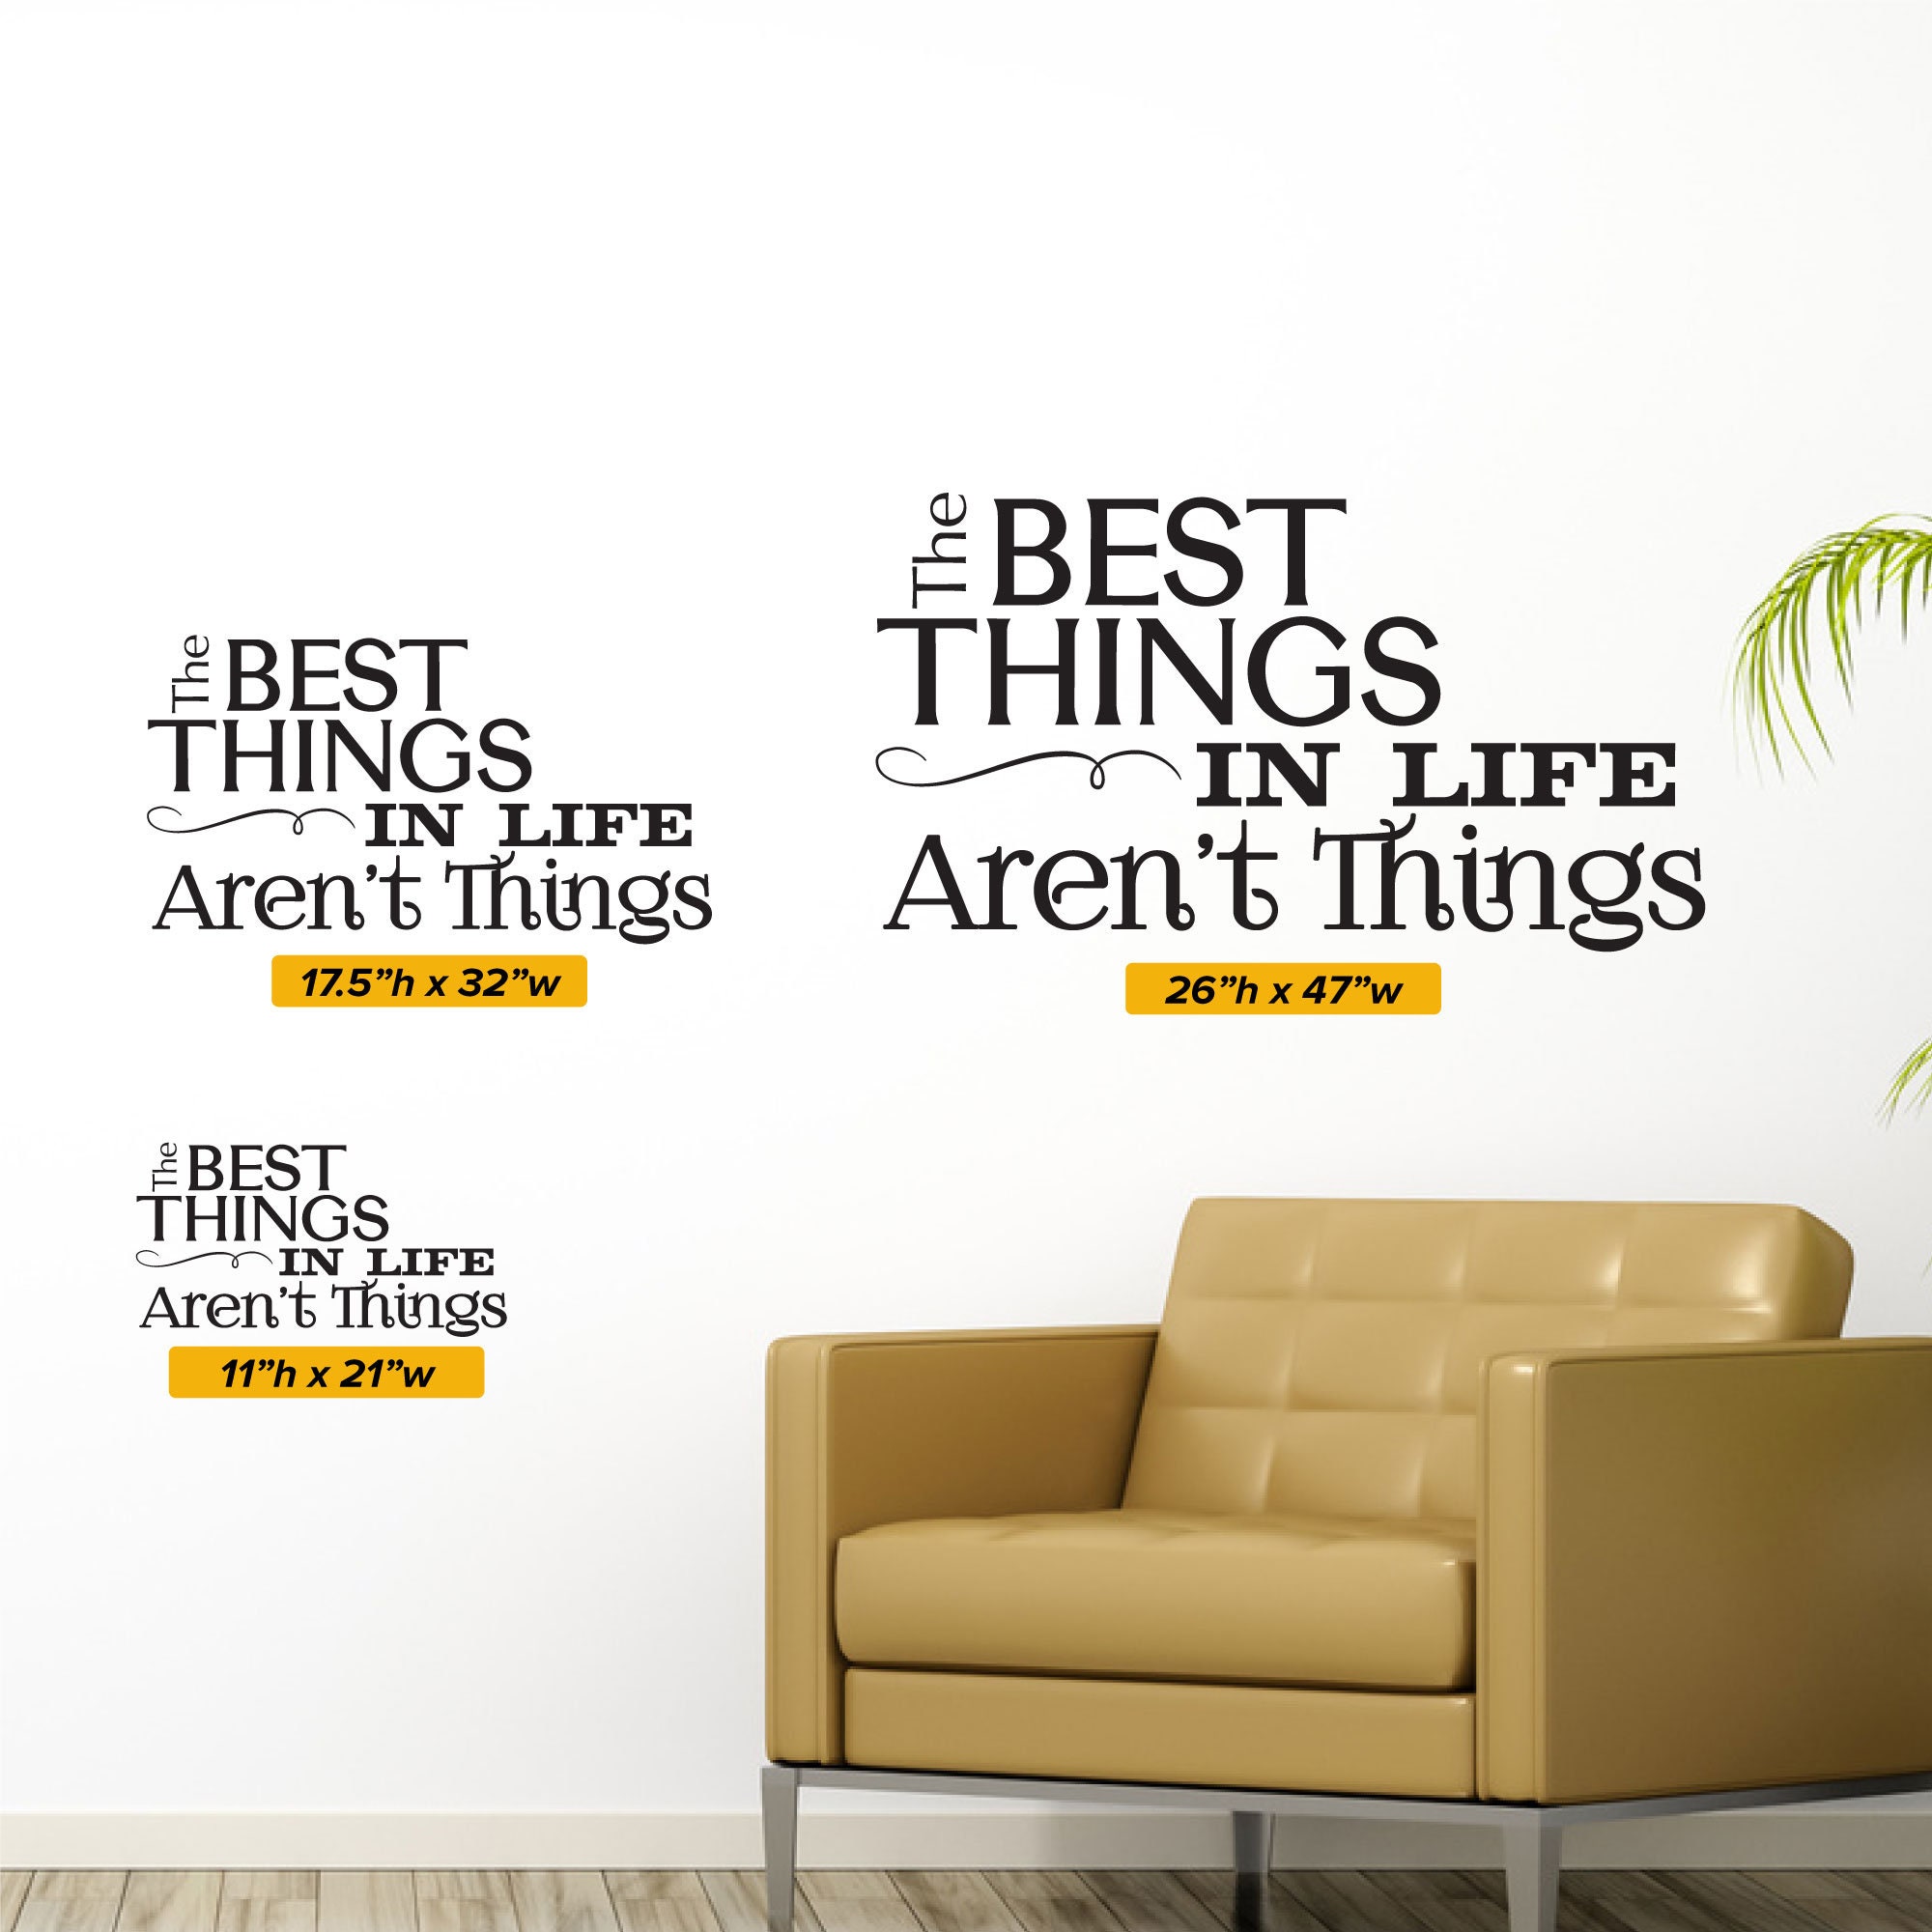 Best Things in Life Arent Things Wall Decor 0029 Wall | Etsy